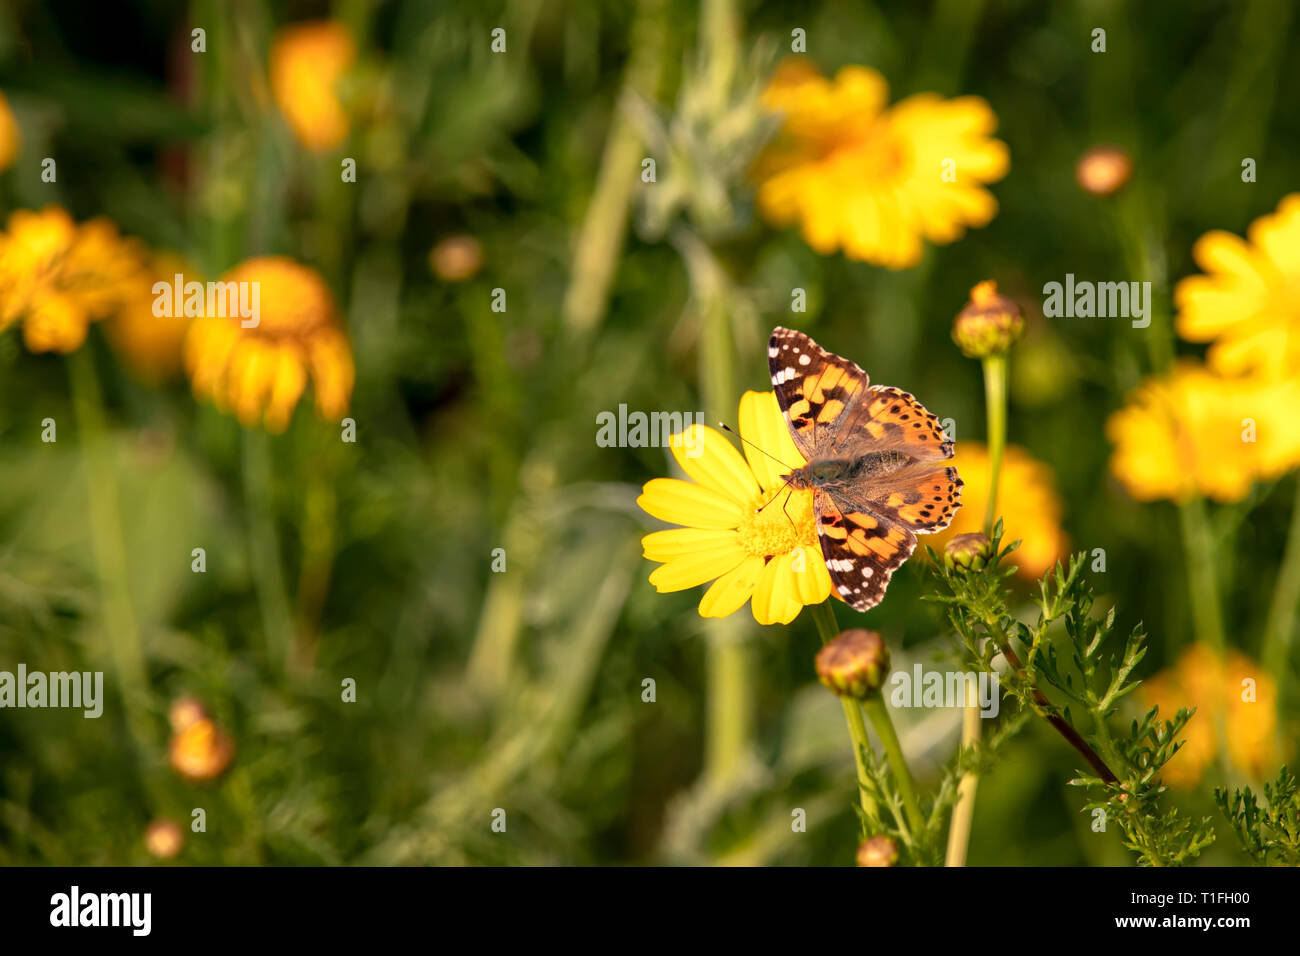 Butterfly Vanessa cardui sitting on a flower of yellow wild chrysanthemum during migration from Africa to Europe through Israel Stock Photo